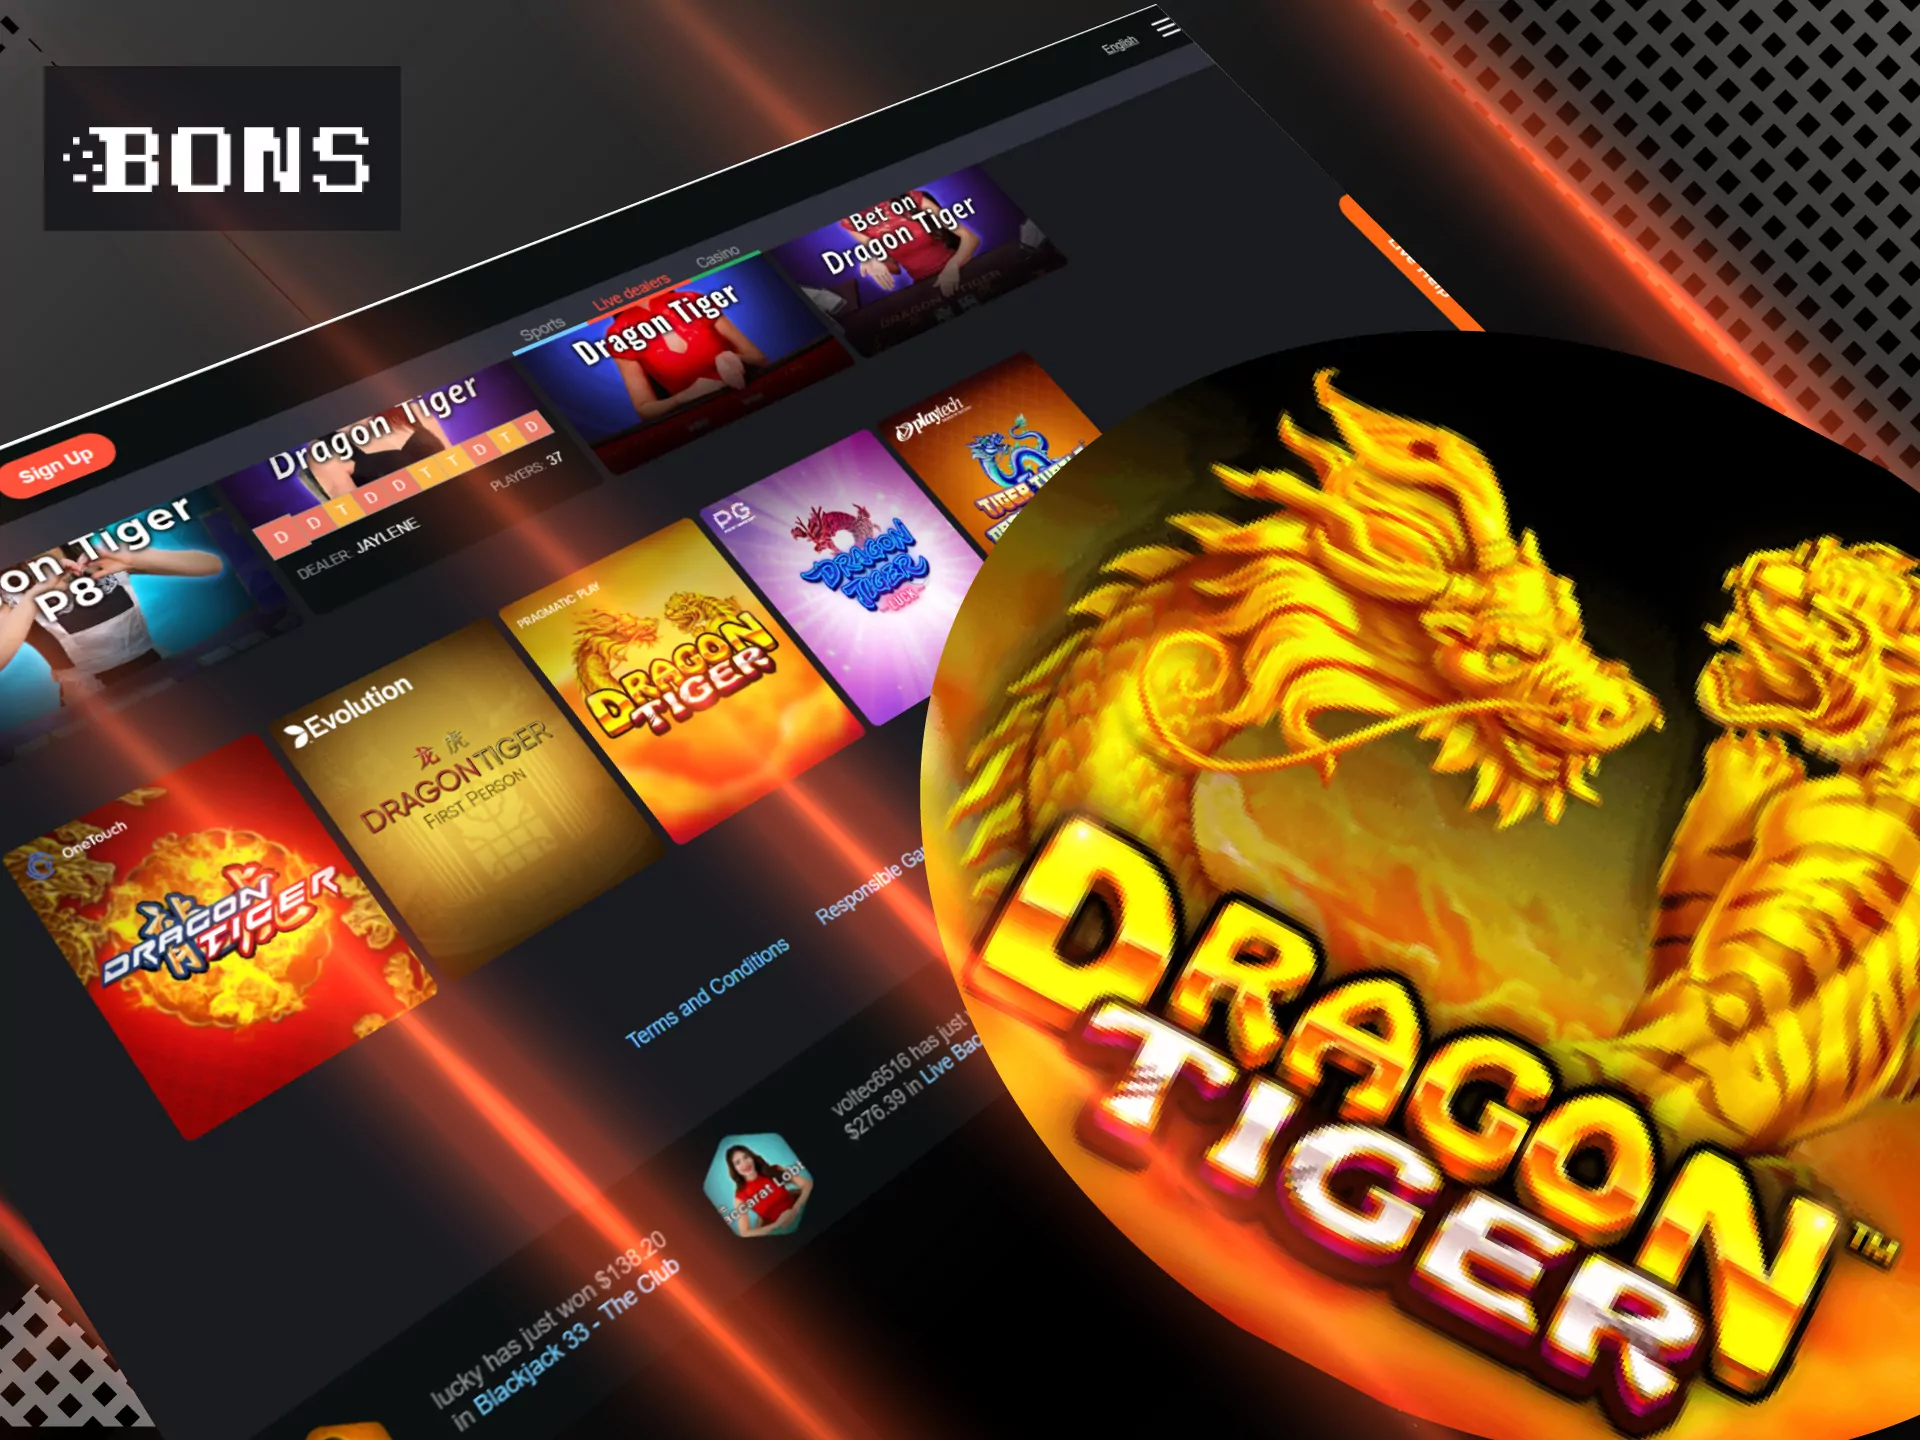 There is also a great online games Dragon TIger in the Bons casino.